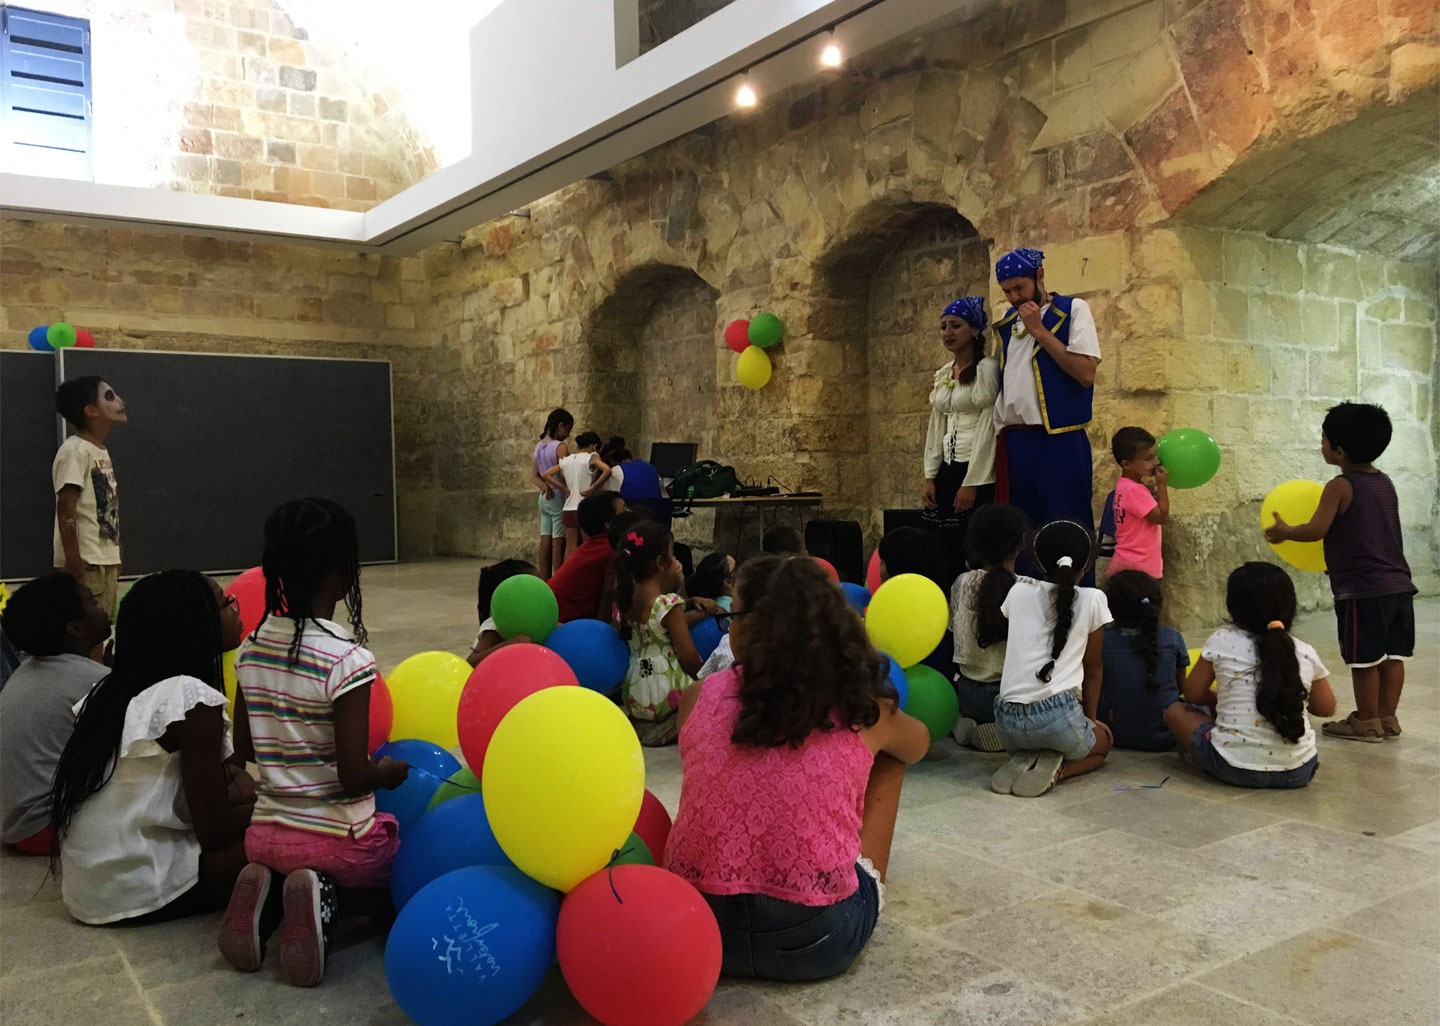 Summer event organised for local children’s homes by Valletta Cruise Port Social Club